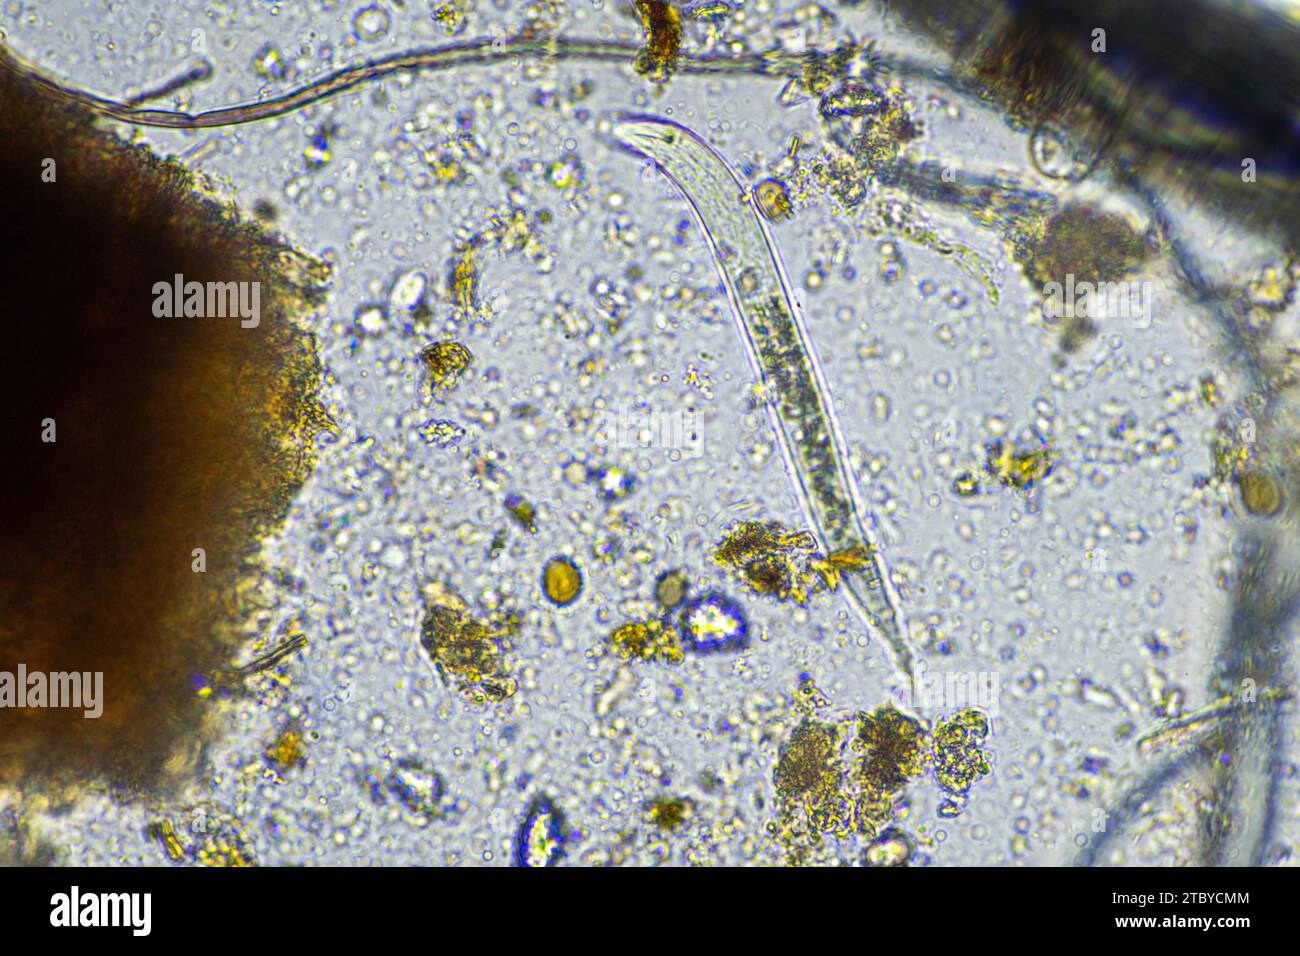 microscopic fungus and microorganisms in a sample in australia Stock Photo